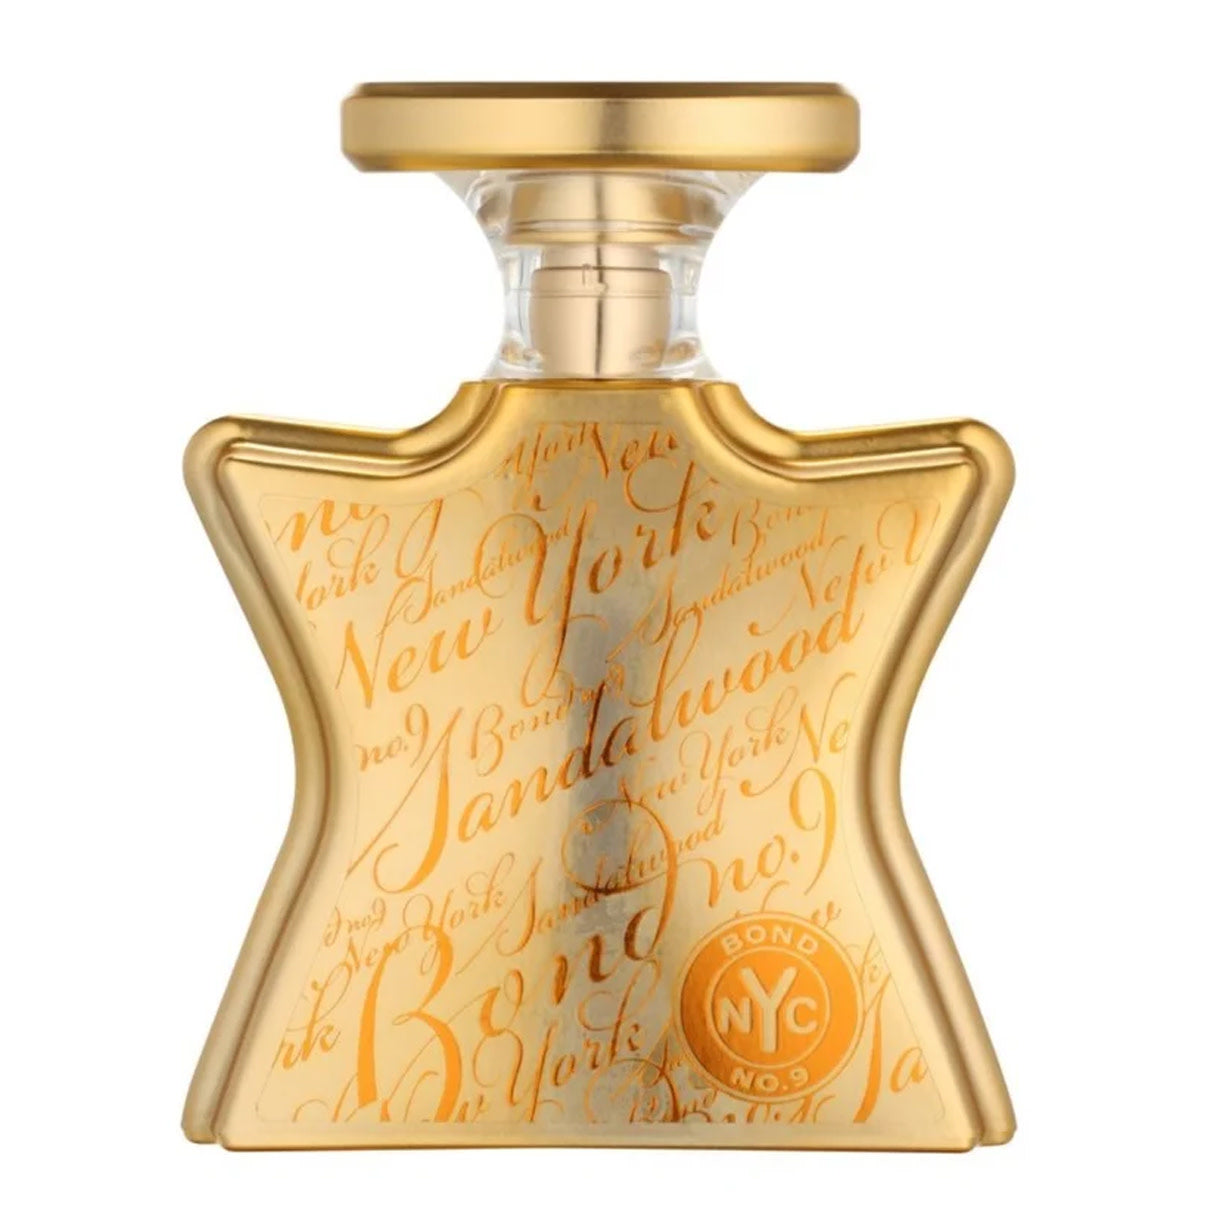 In October 2014, New York-based house Bond No9 presents a new fragrance which belongs to the collection dedicated to certain raw materials Bond No9 New York Notes. It has been inspired by sandalwood which has been used as a significant component of numerous compositions for thousands of years.

Sandalwood will take an important role in the fragrance Bond No9 Sandalwood. After Amber, Oud, Musk and Patchouli, perfume Sandalwood will provide its precious, warm, creamy, milky face, leaving an irresistible woody trail on the skin.

Bond No9 New York Sandalwood is an oriental-woody fragrance with shades of carrot in top notes. The composition starts with fresh, sweet-earthy shade of carrot which is blended with a powdery veil of orris root (evoking velvety violets) and spacy accords of cardamom. This unusual union leads to the heart dominated by creamy, milky sandalwood, sweetened additionally with juicy, ripe fig with papyrus trail providing a dry, aromatic note. The base incorporates honey amber, oak moss and animalistic musk.

New perfume of the collection of Bond No9 arrives in characteristic flacon, in golden color, with inscribed name of the brand, collection and perfume. Available as 100ml Eau de Parfum.